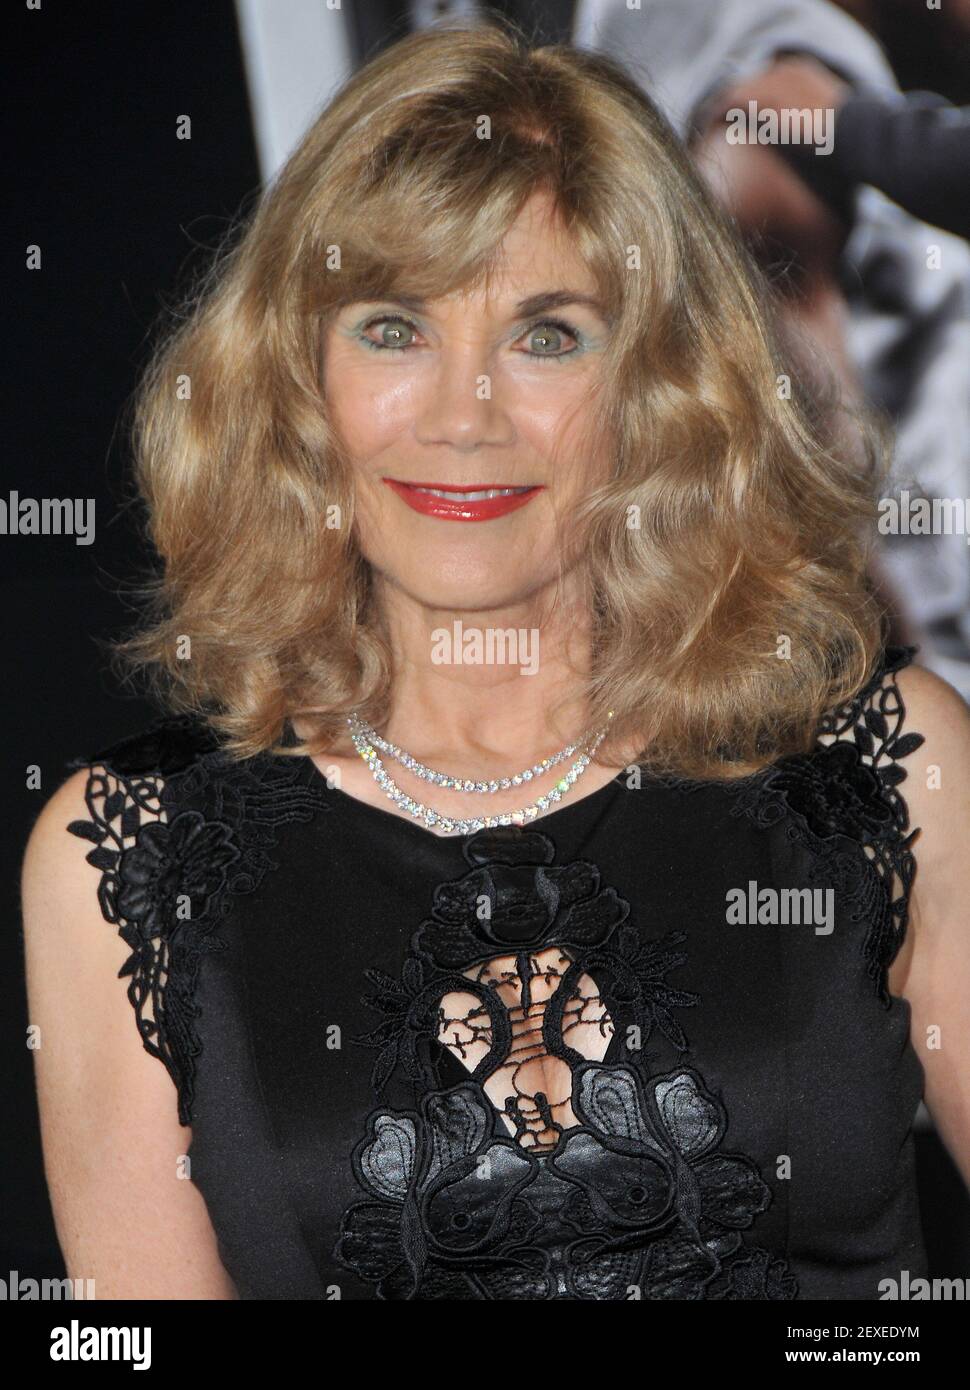 Barbi Benton arrives at "Creed" Los Angeles Premiere held at the Regency Village Theater in CA on Thursday, November 19, 2015. (Photo By Sthanlee B. Mirador) Please Use Credit